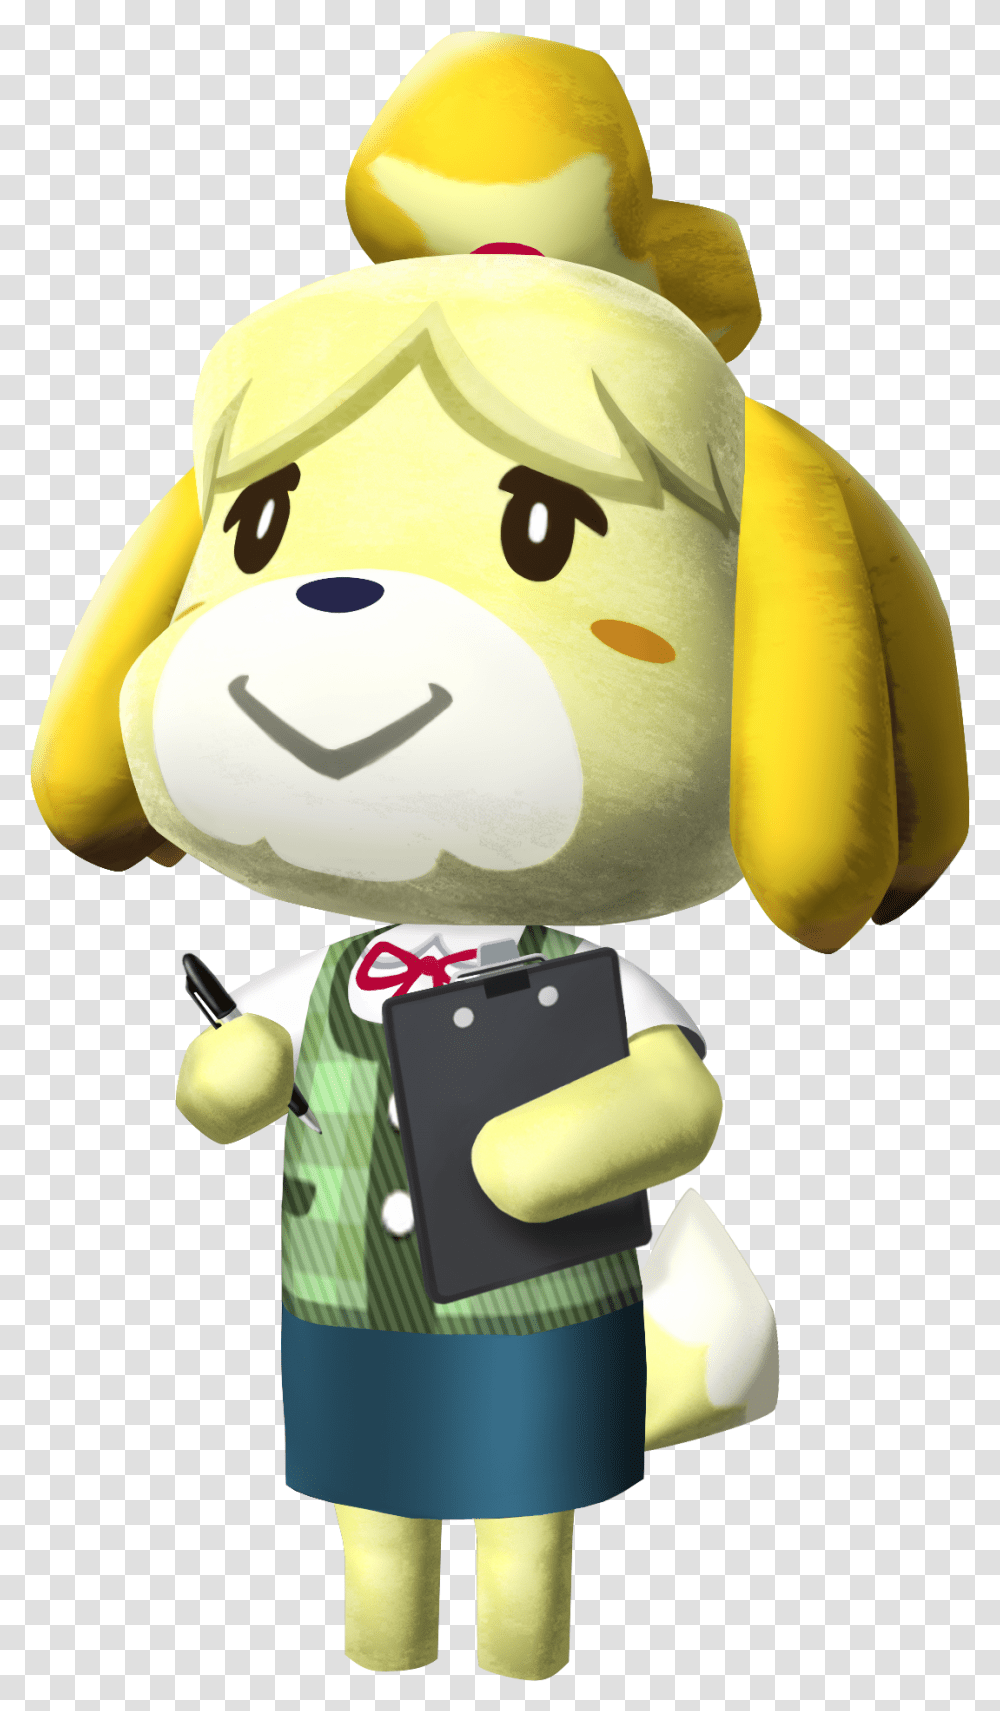 Animal Crossing New Leaf Animal Crossing Dog Character, Mascot, Figurine, Toy, Sweets Transparent Png